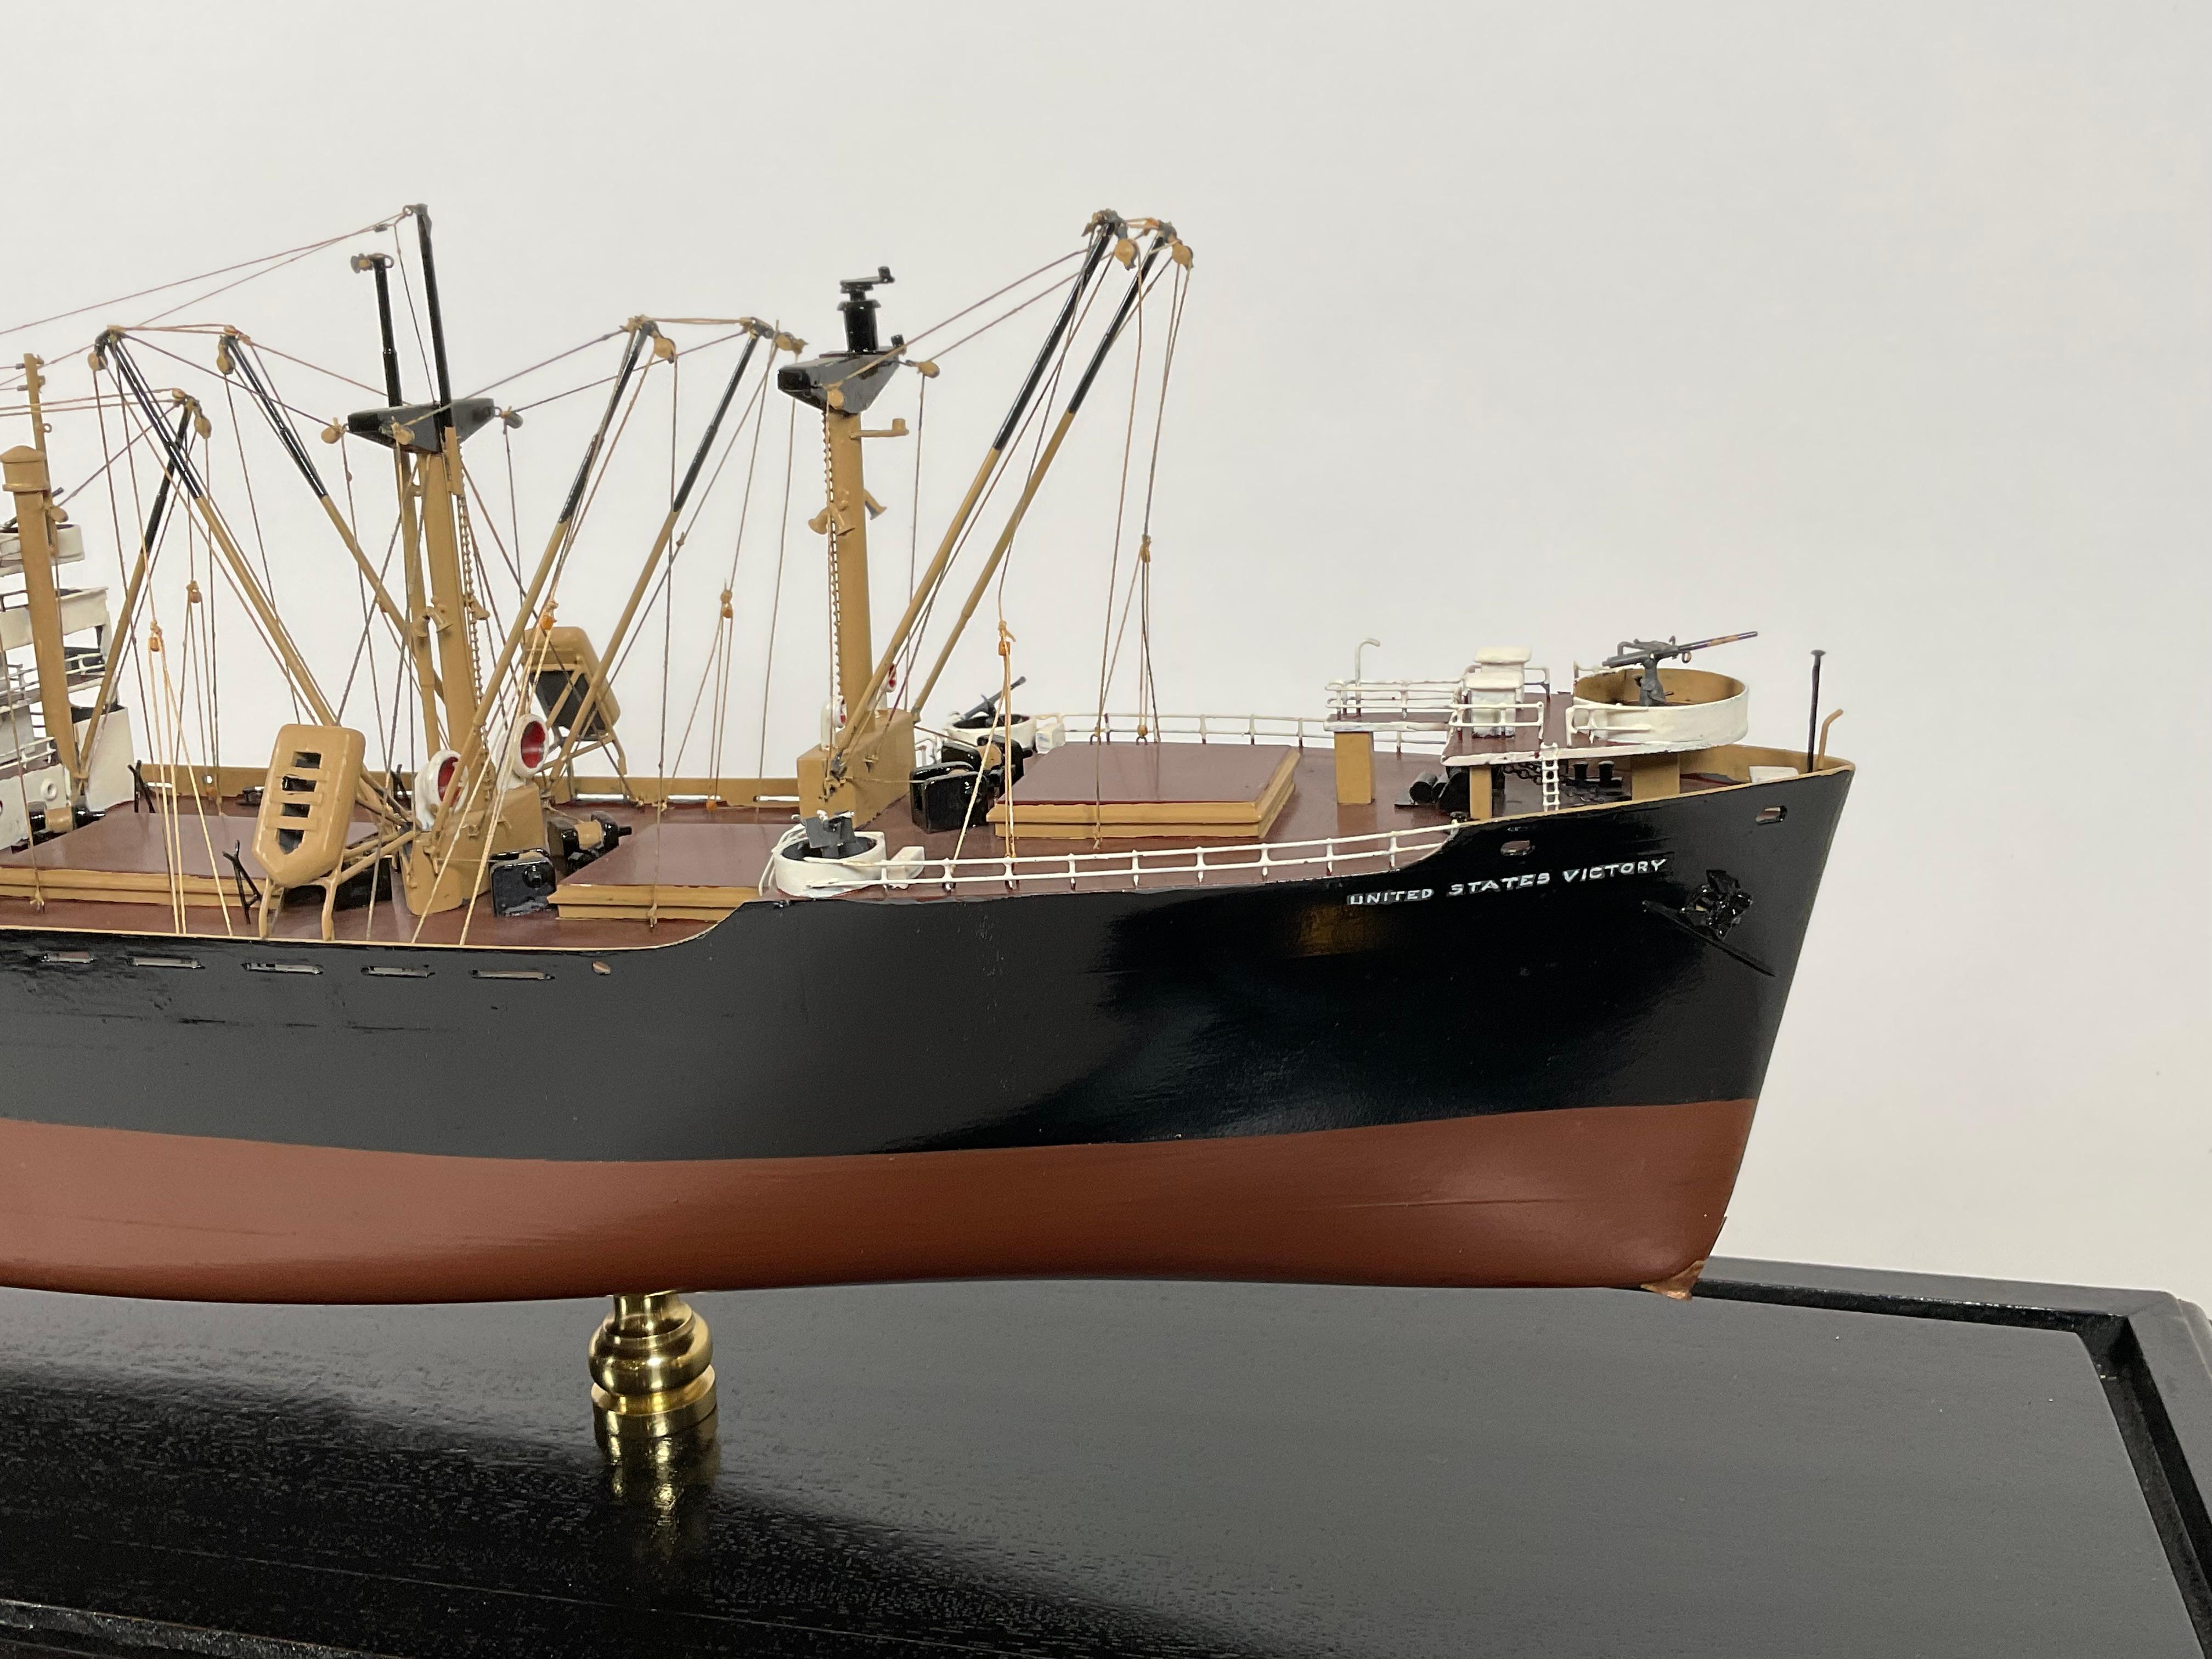 North American Model of the American Merchant Ship “United States Victory” For Sale